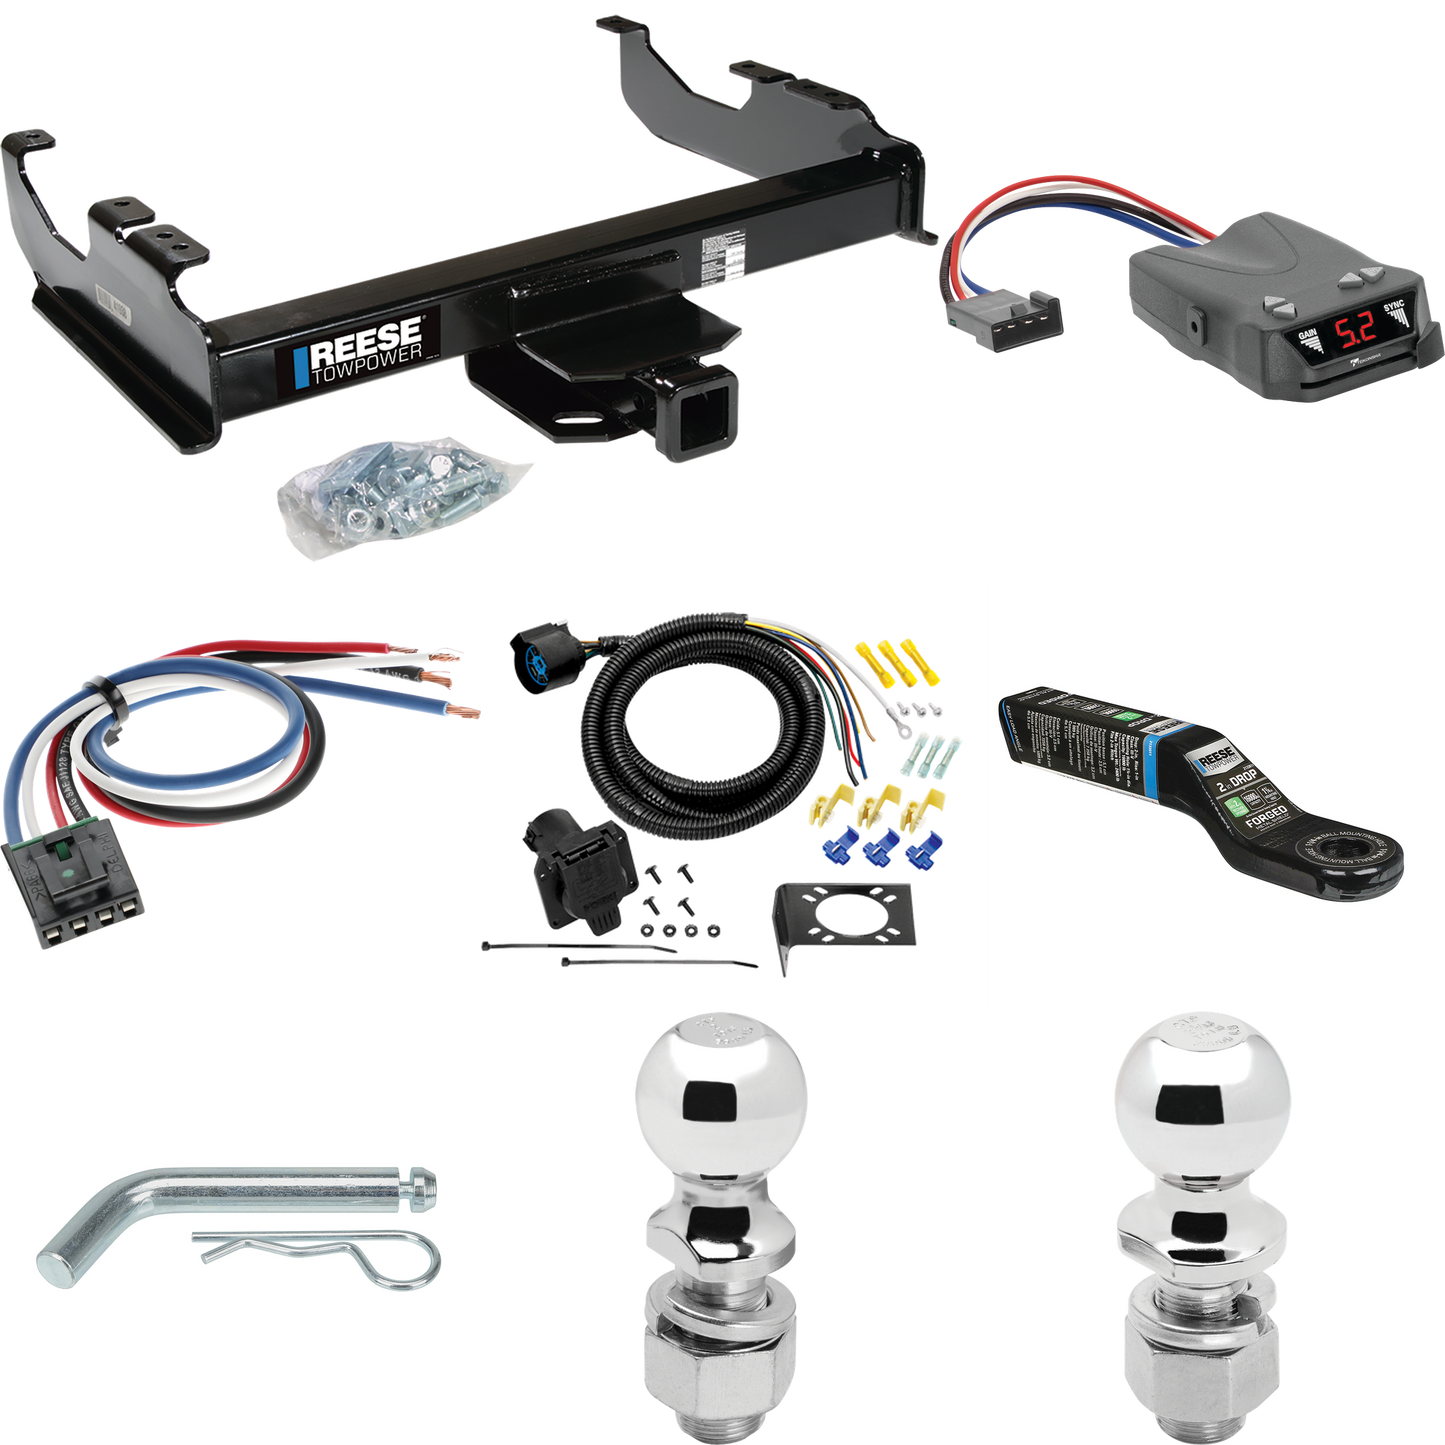 Fits 1985-2000 GMC K3500 Trailer Hitch Tow PKG w/ Tekonsha Brakeman IV Brake Control + Generic BC Wiring Adapter + 7-Way RV Wiring + 2" & 2-5/16" Ball & Drop Mount (For w/34" Wide Frames Models) By Reese Towpower